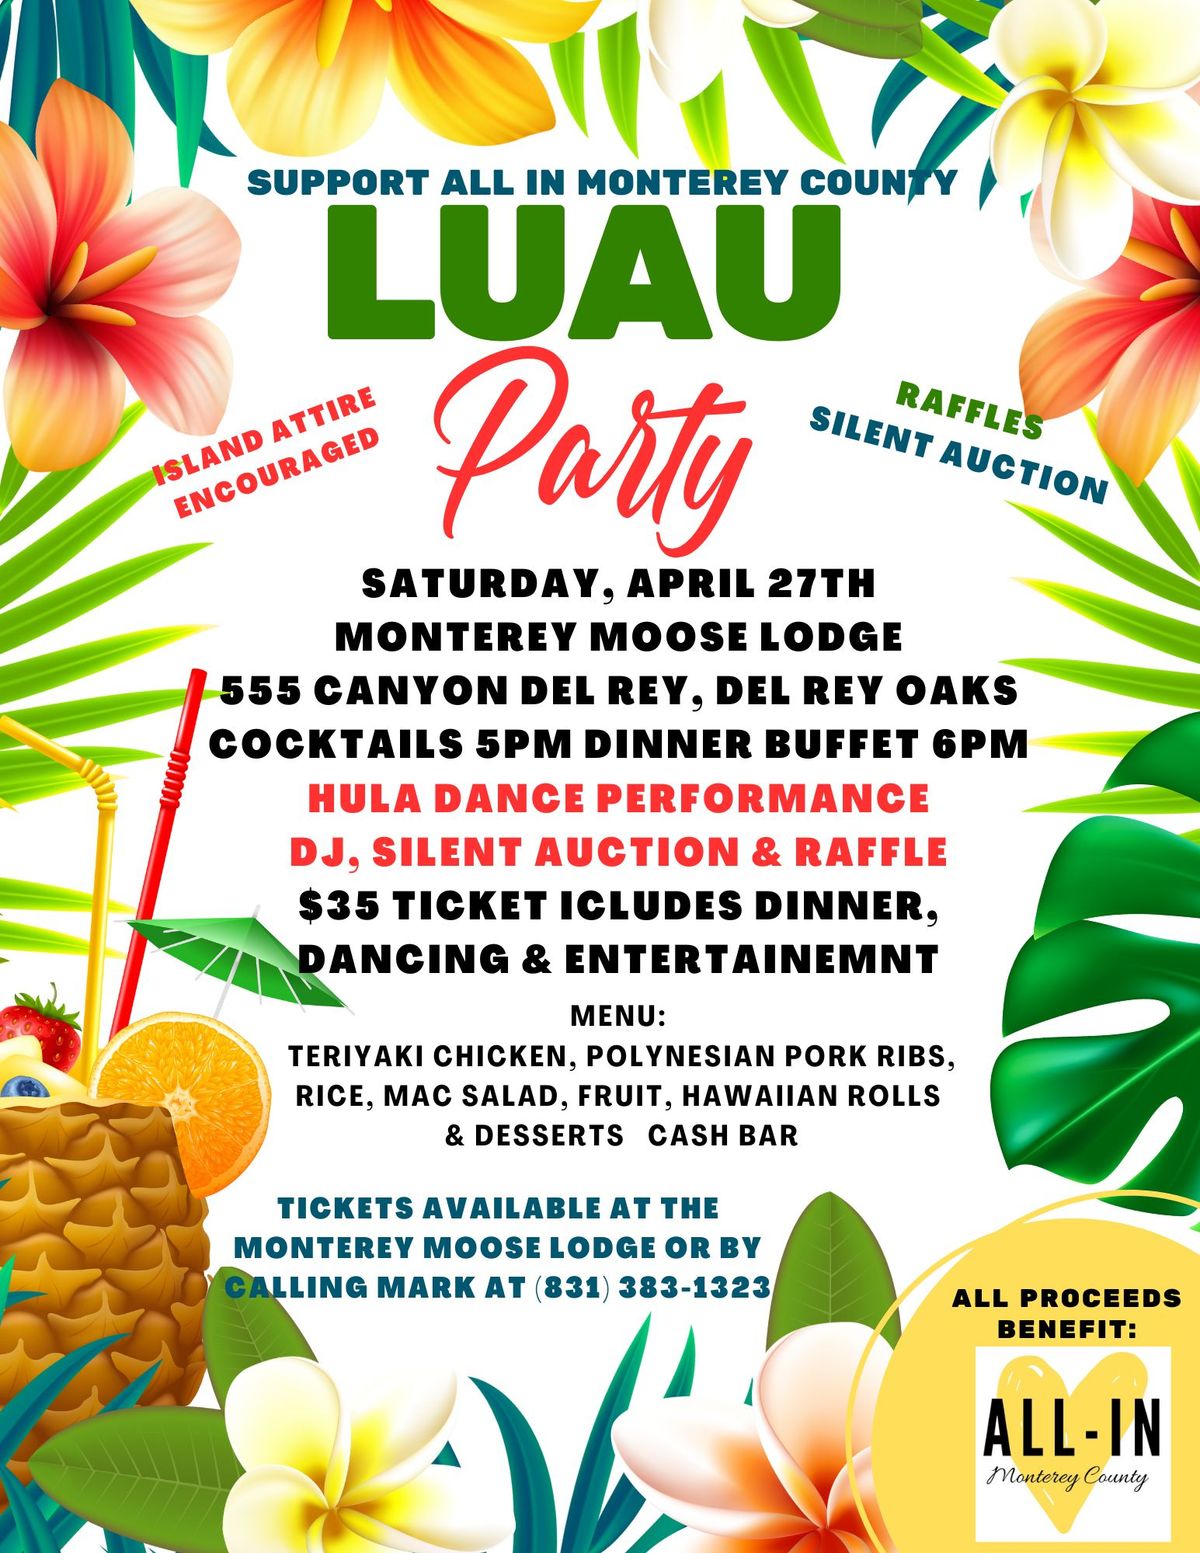 LUAU PARTY To Support All In Monterey County